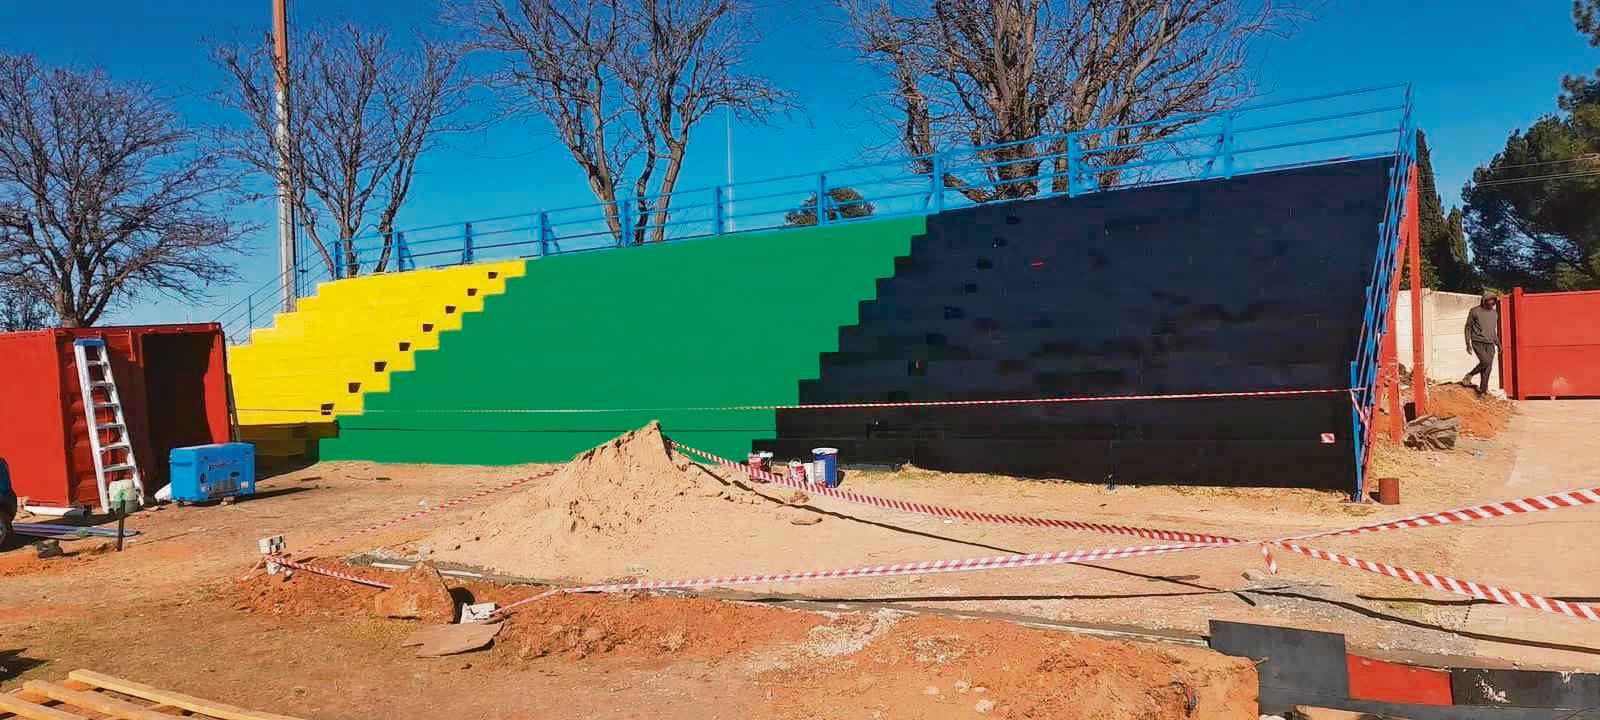 Matjhabeng municipality allegedly paid a service provider R6 million to repair the Zuka Baloyi stadium in Welkom and painted it with ANC colours. 